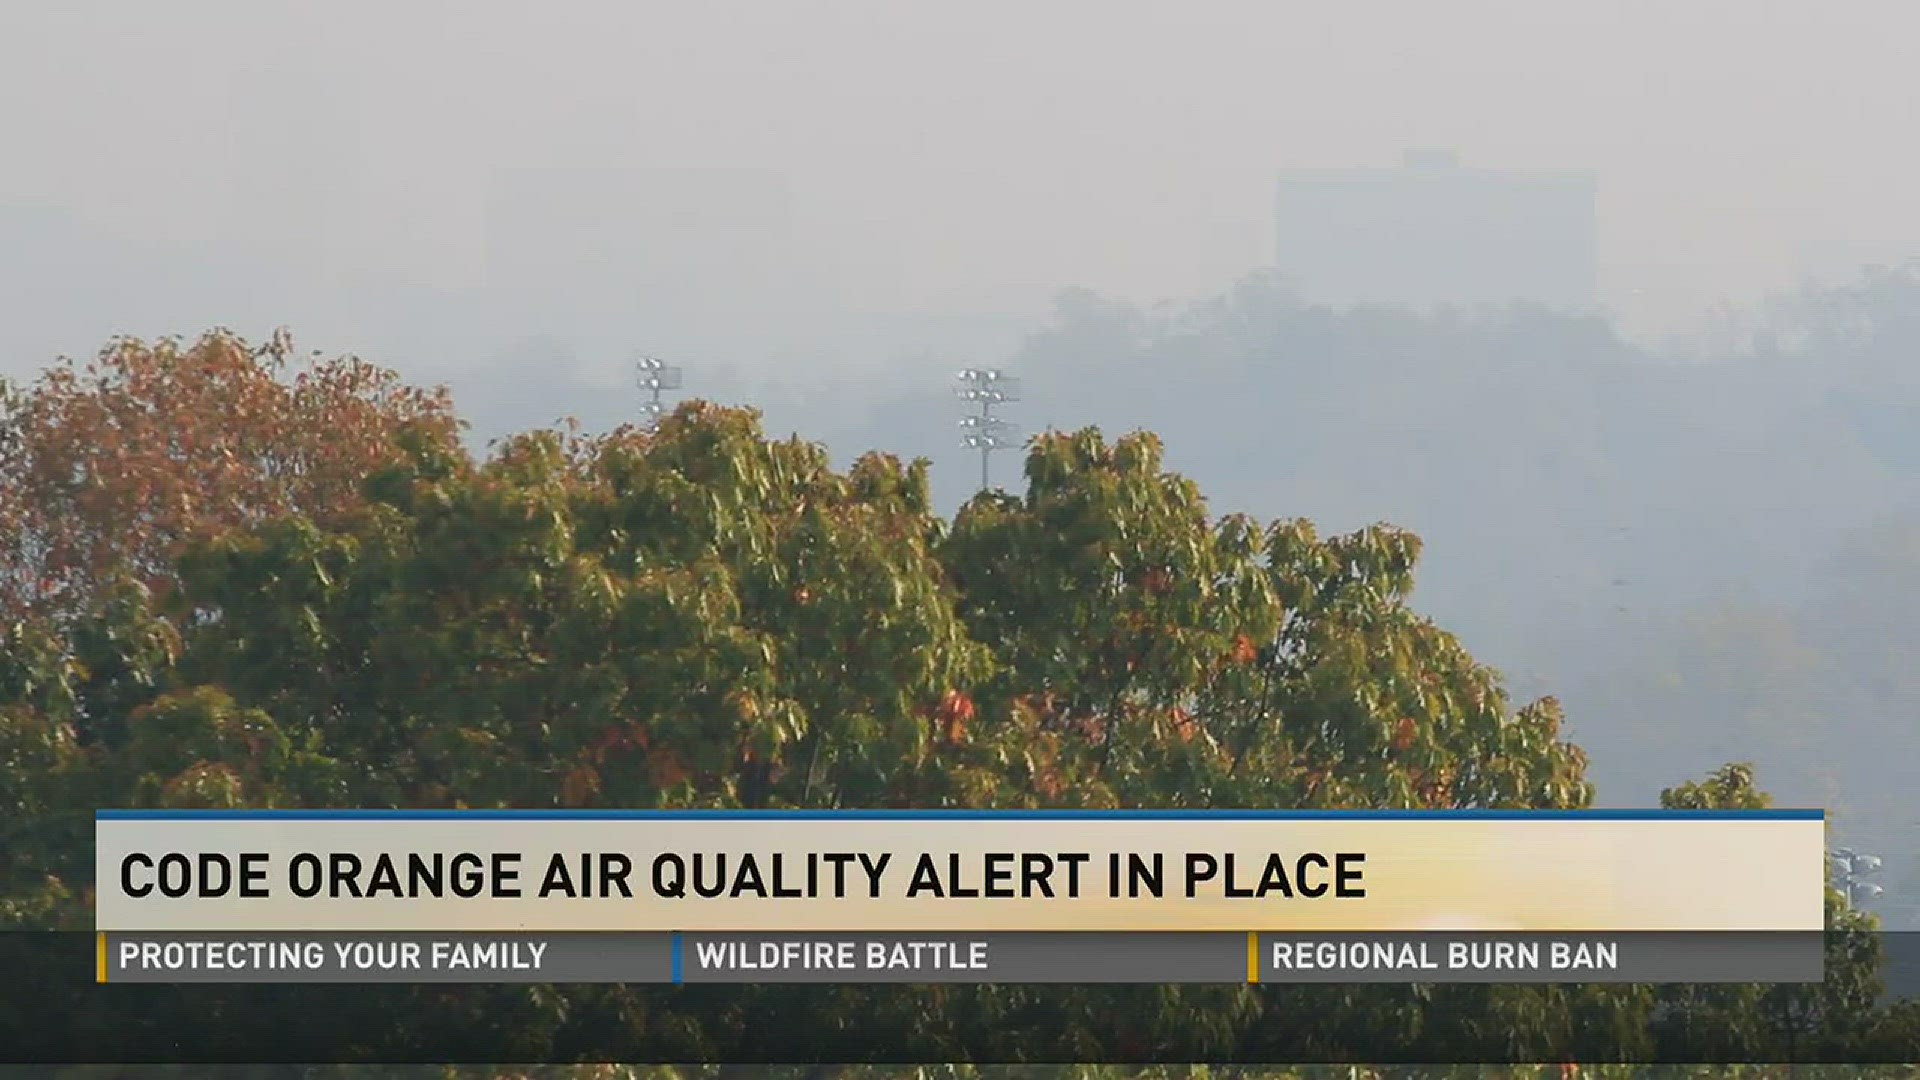 A Code Orange Air Quality Alert has been extended through Tuesday for all of East Tennessee.